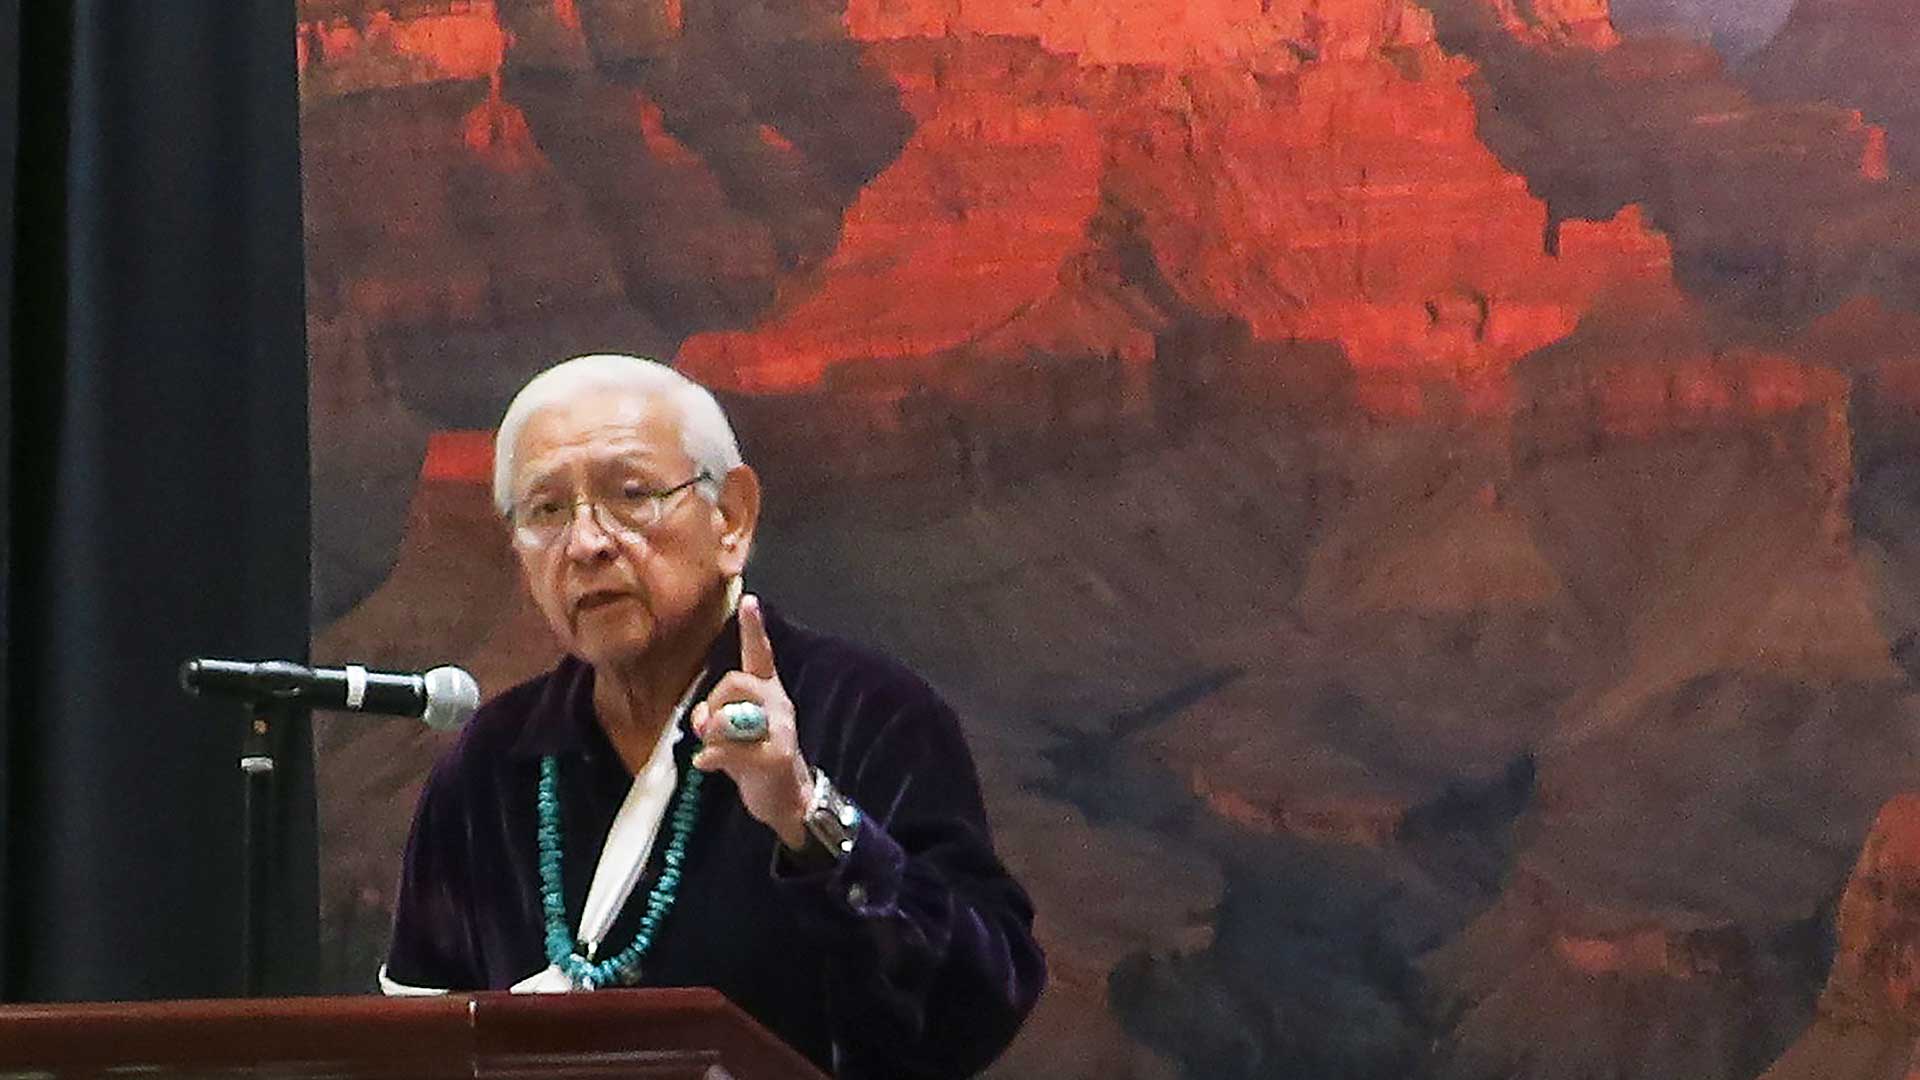 Former Navajo chairman and president, Peterson Zah, speaks to a crowd gathered to honor his work in promoting Navajo language and culture, inspiring youth, and strengthening tribal sovereignty on Jan. 11, 2022, at the Navajo Nation casino east of Flagstaff, Ariz.